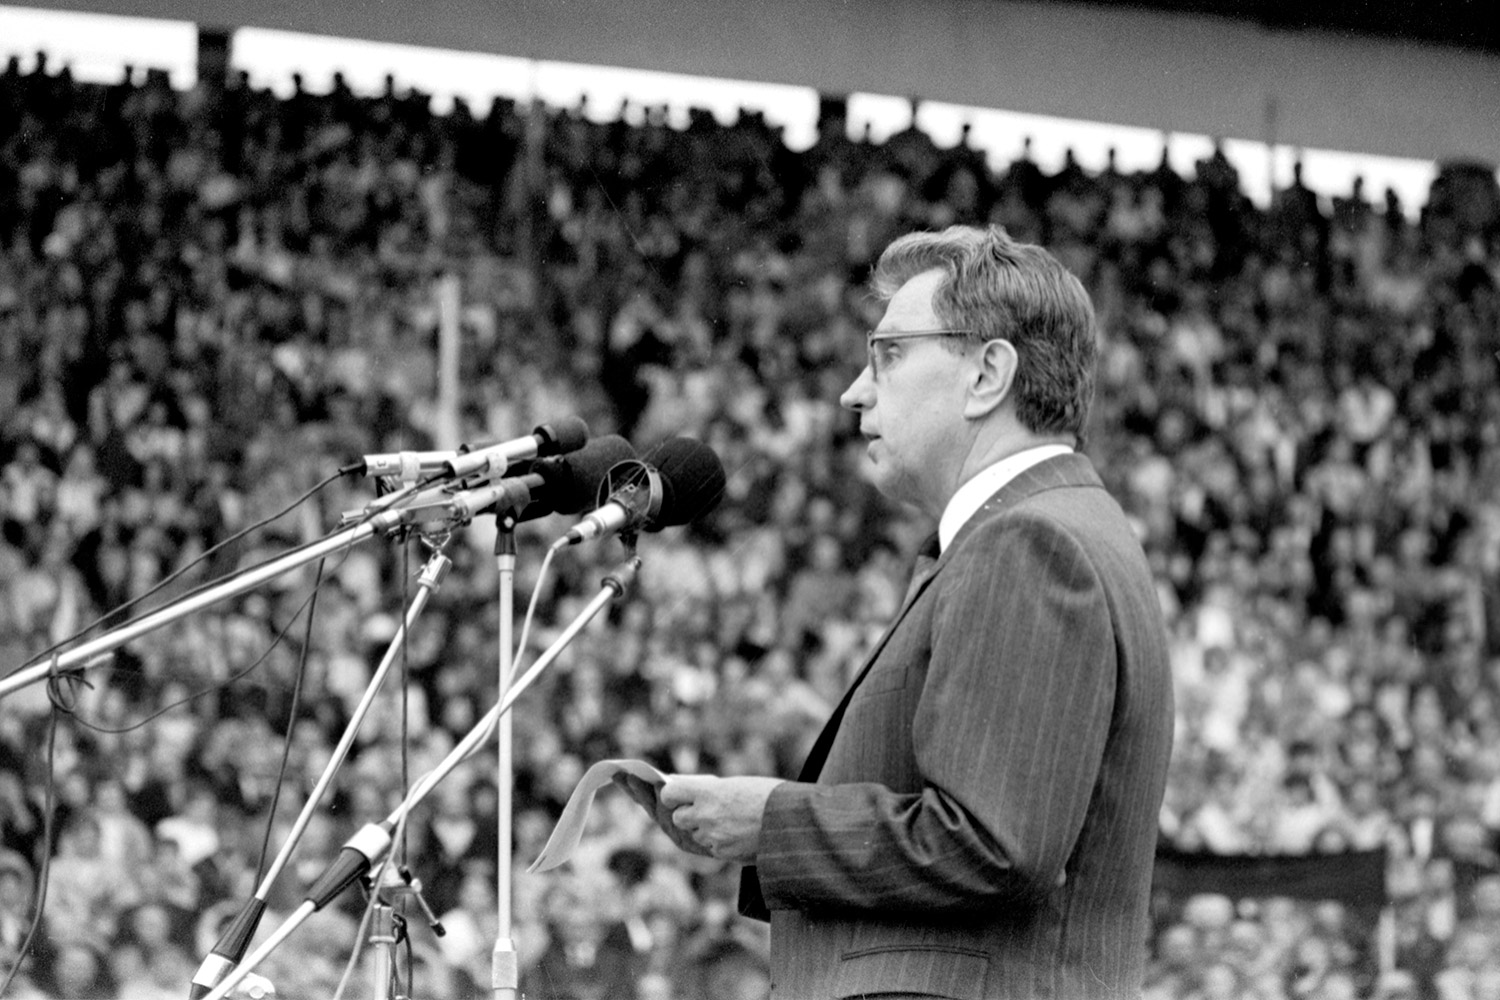 23/08/1988 – Rally by the Reform Movement of Lithuania (hereinafter – Sąjūdis) at Vingis Park to mark the 49th anniversary of the Molotov-Ribbentrop Pact and condemn Lithuania’s occupation/annexation. Speech by the poet Justinas Marcinkevičius. LVCA, photographer: J. Juknevičius.